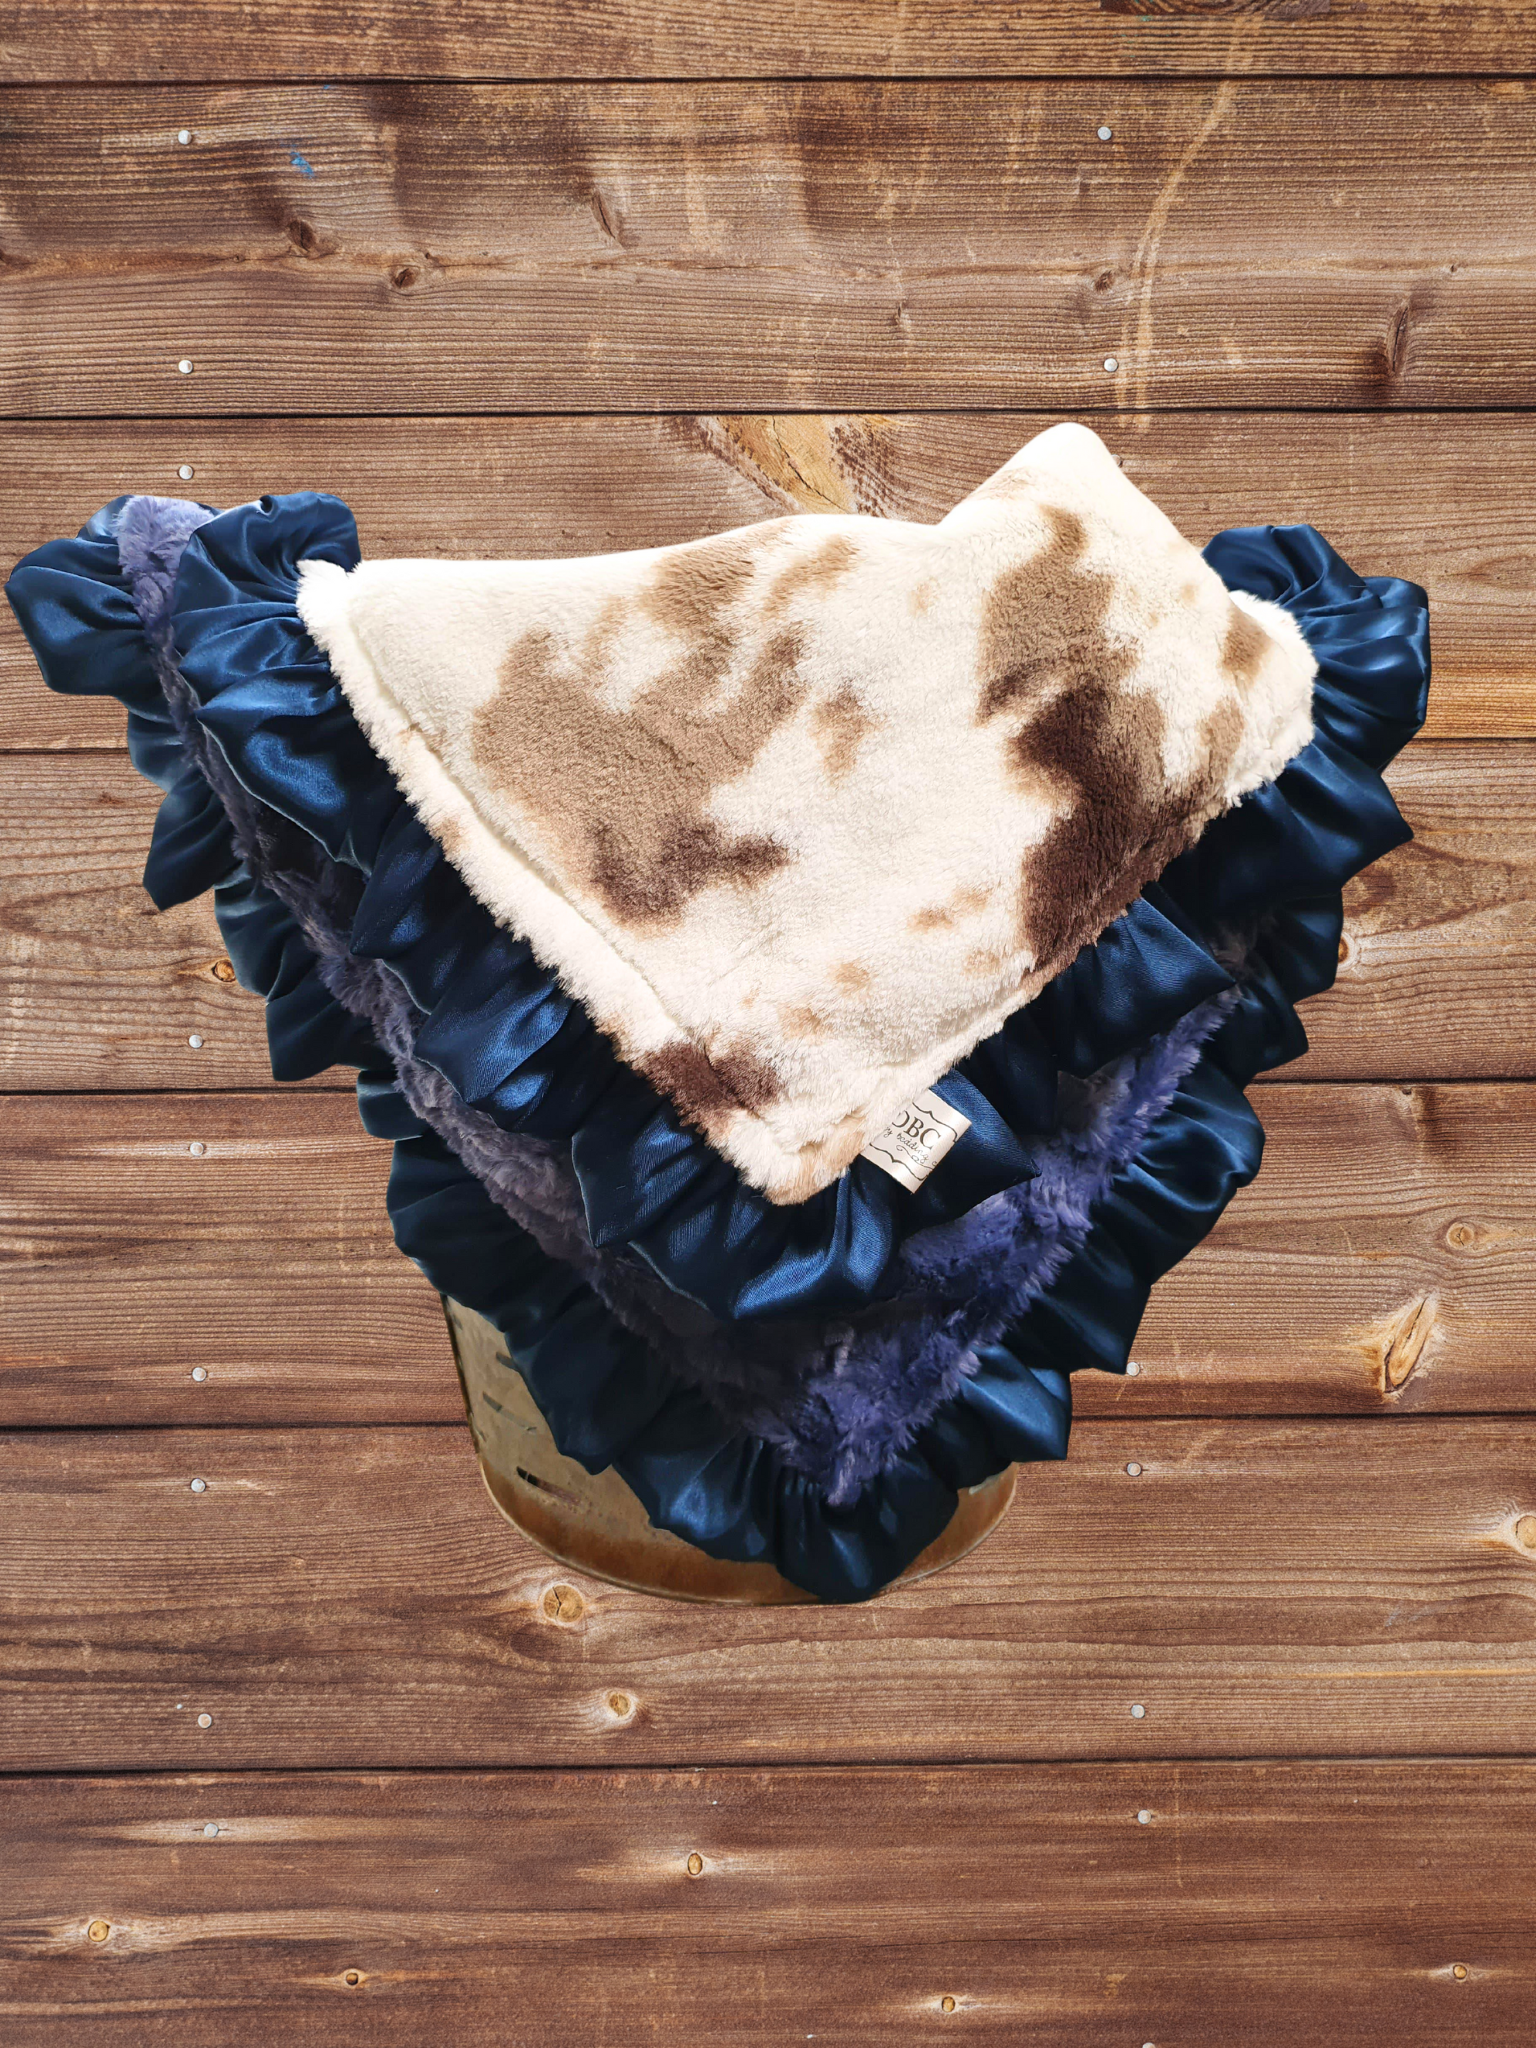 Ruffle Baby Blanket - Brown Sugar Cow and Navy Minky Western Blanket - DBC Baby Bedding Co 